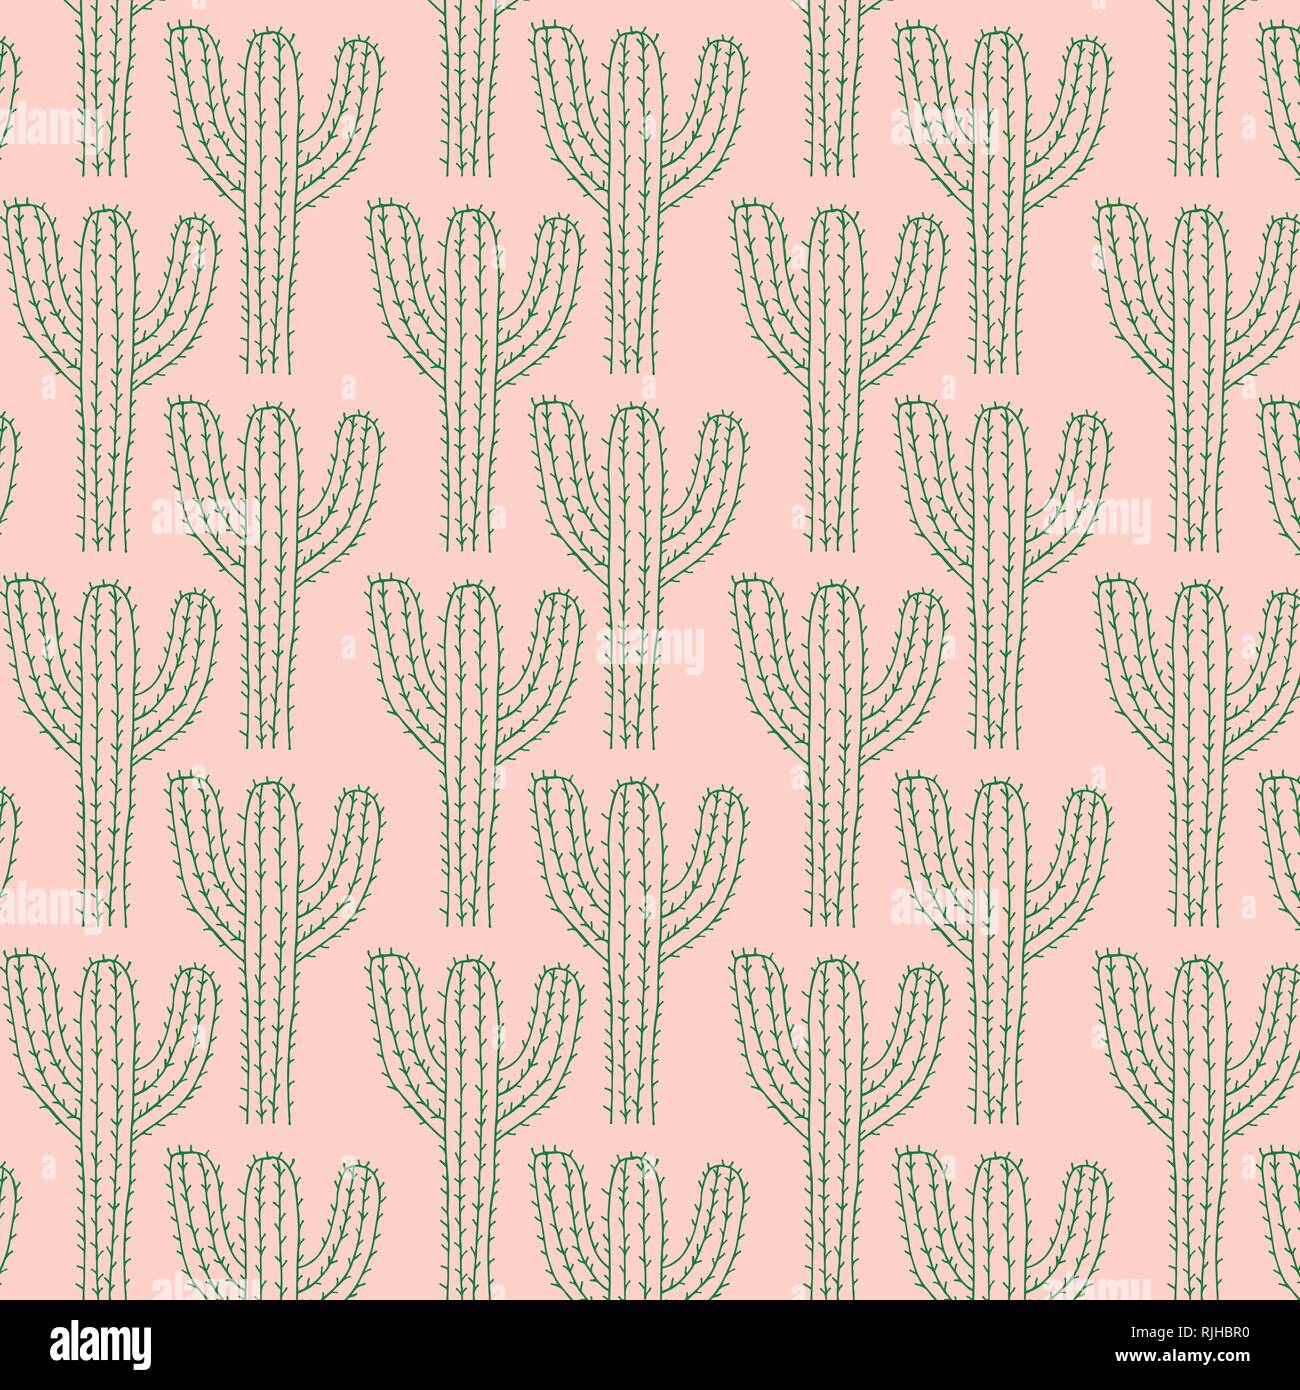 Cactus vector pattern in a pink and green color palette Stock Vector